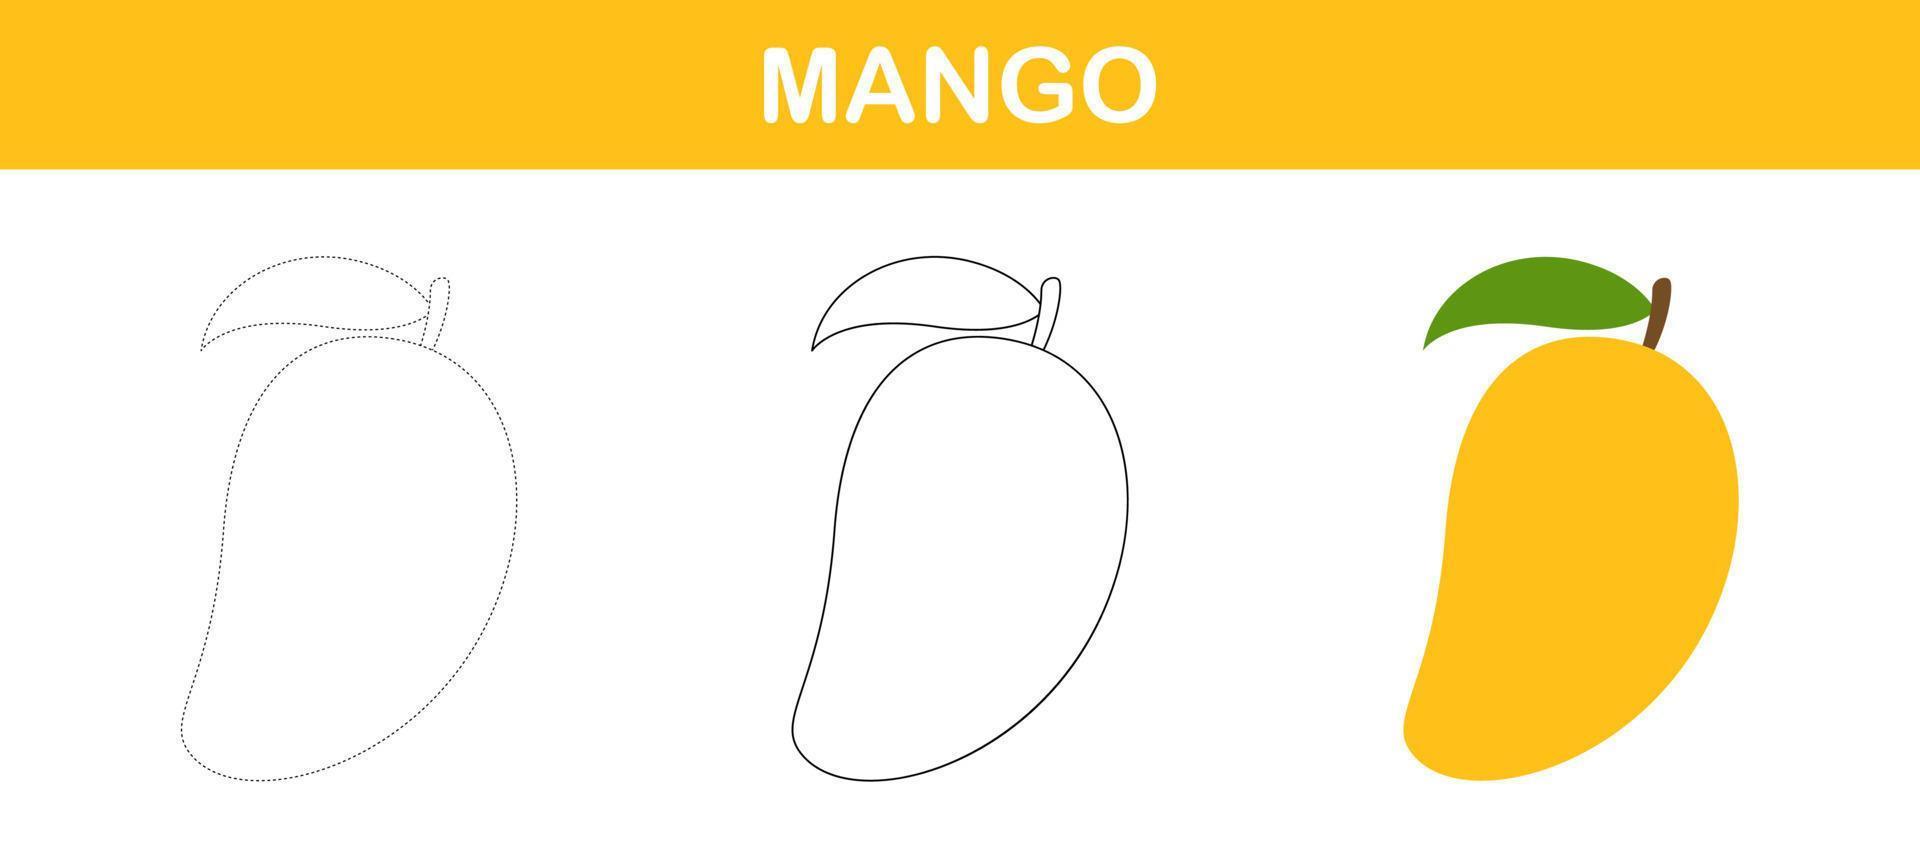 Mango tracing and coloring worksheet for kids vector